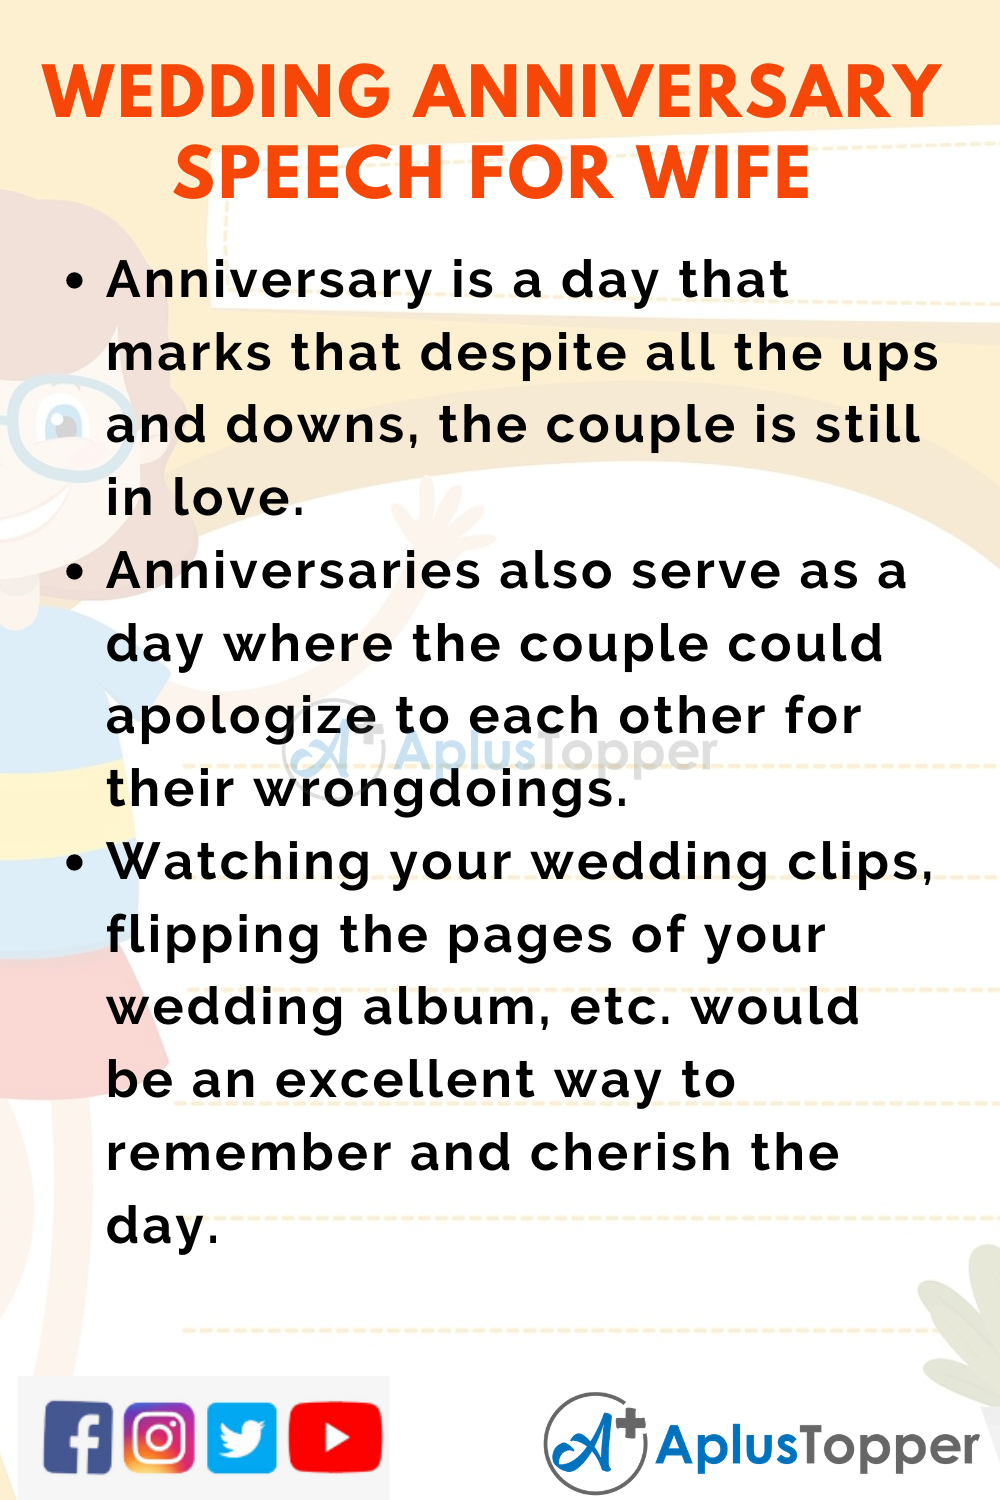 Short Speech On Wedding Anniversary for Wife 150 Words In English